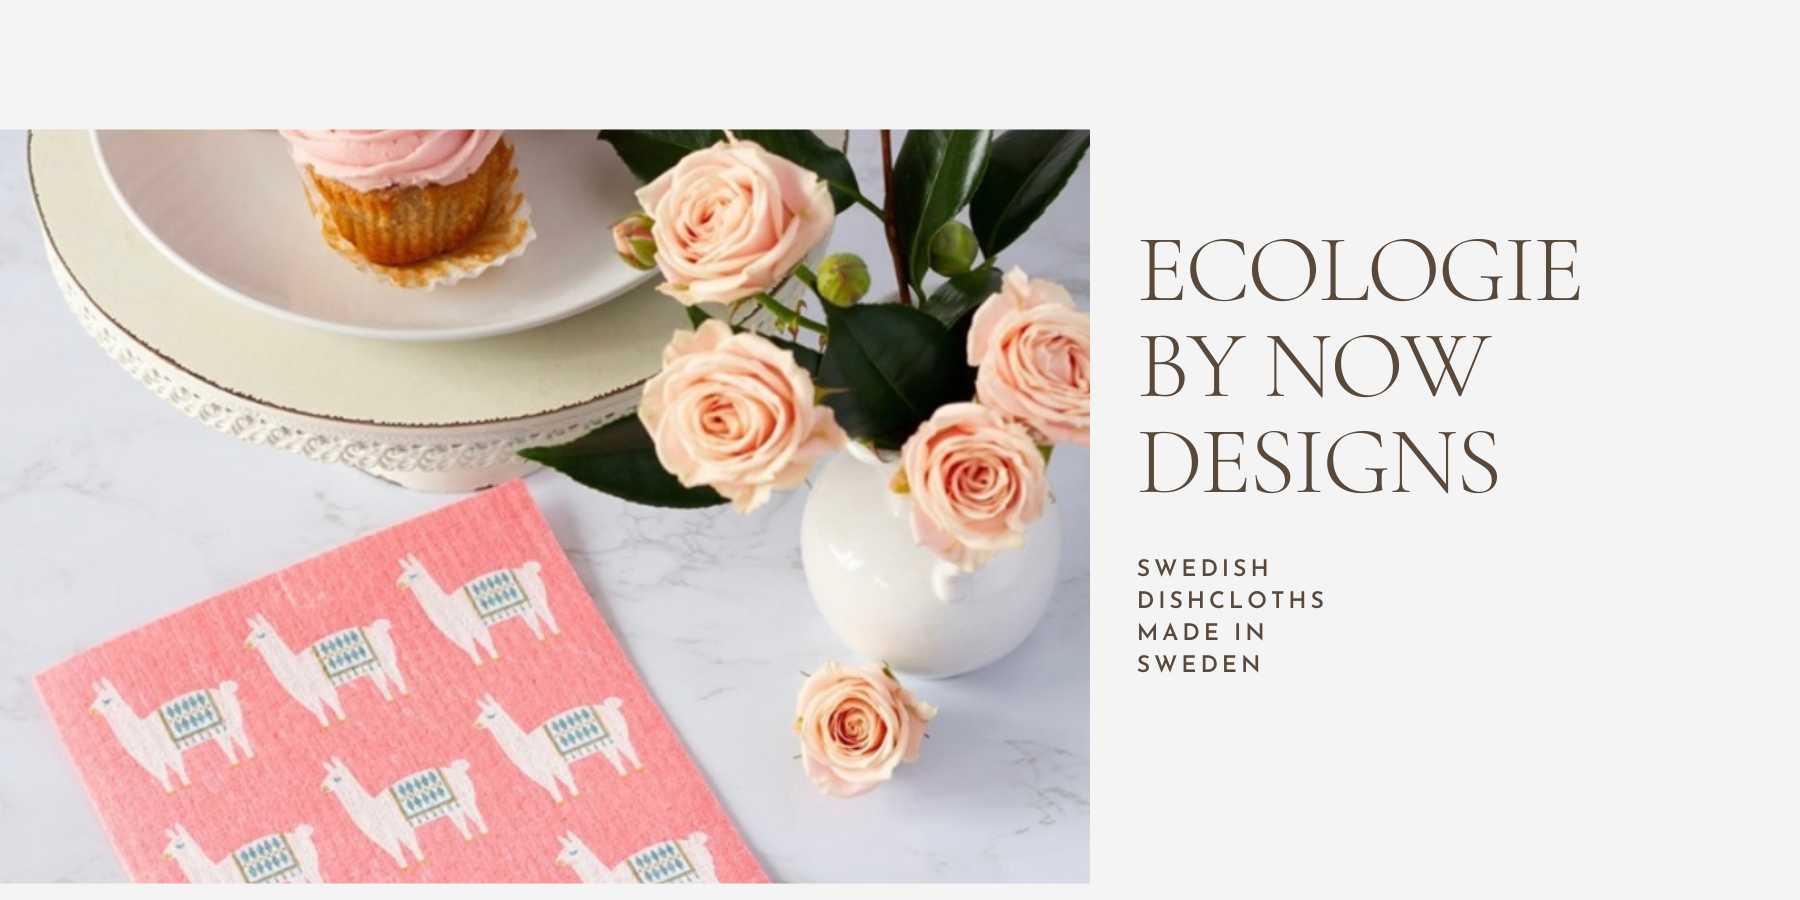 Reusable, compostable, and beautiful, their sponge cloths will help you ditch single-use paper towels and plastic cleaning products. Authentically made in Sweden, and screen-printed using non-toxic inks, their cloths are made in the traditional fashion.